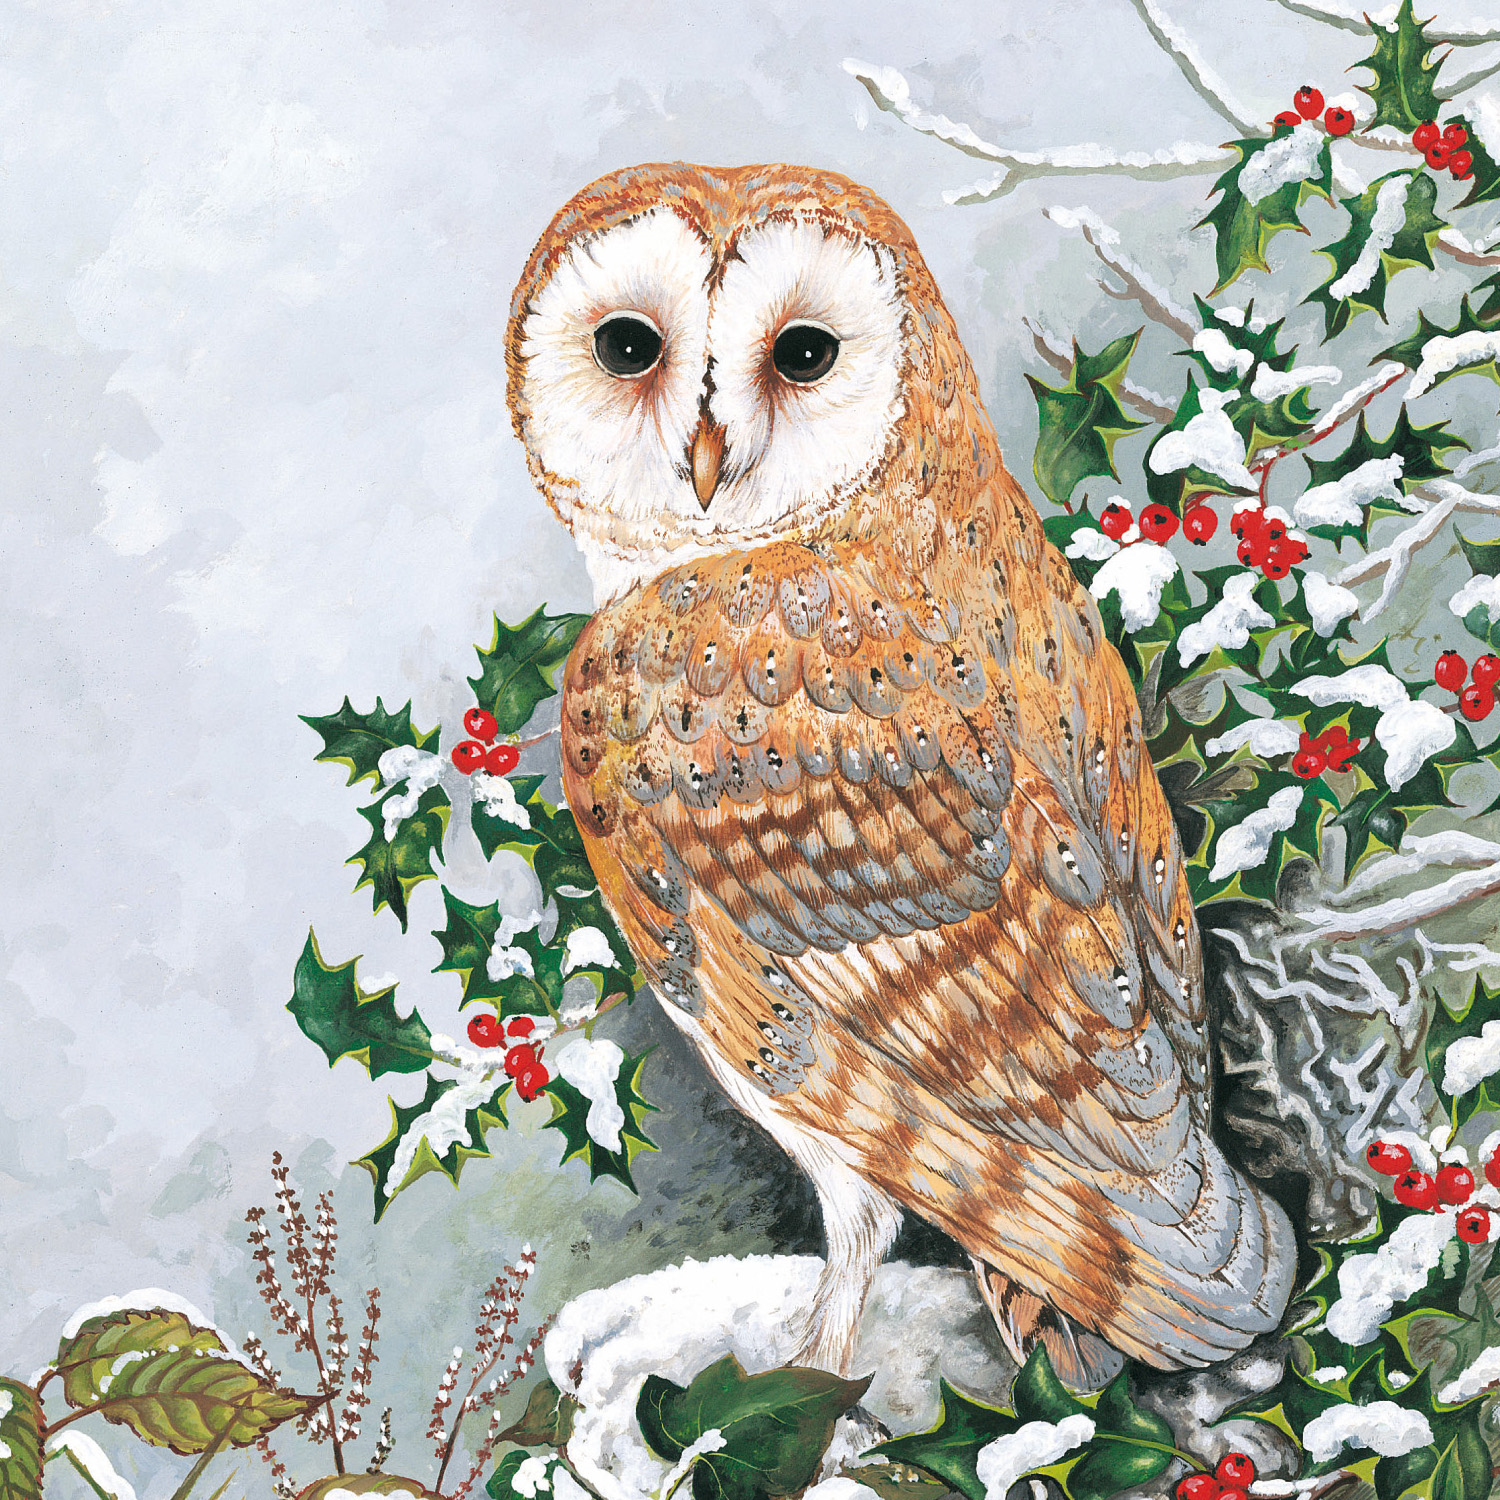 The image from the ClearVision Christmas card: a barn owl sits on the branch of a snow covered holly tree, its face turned to look over its shoulder at the viewer